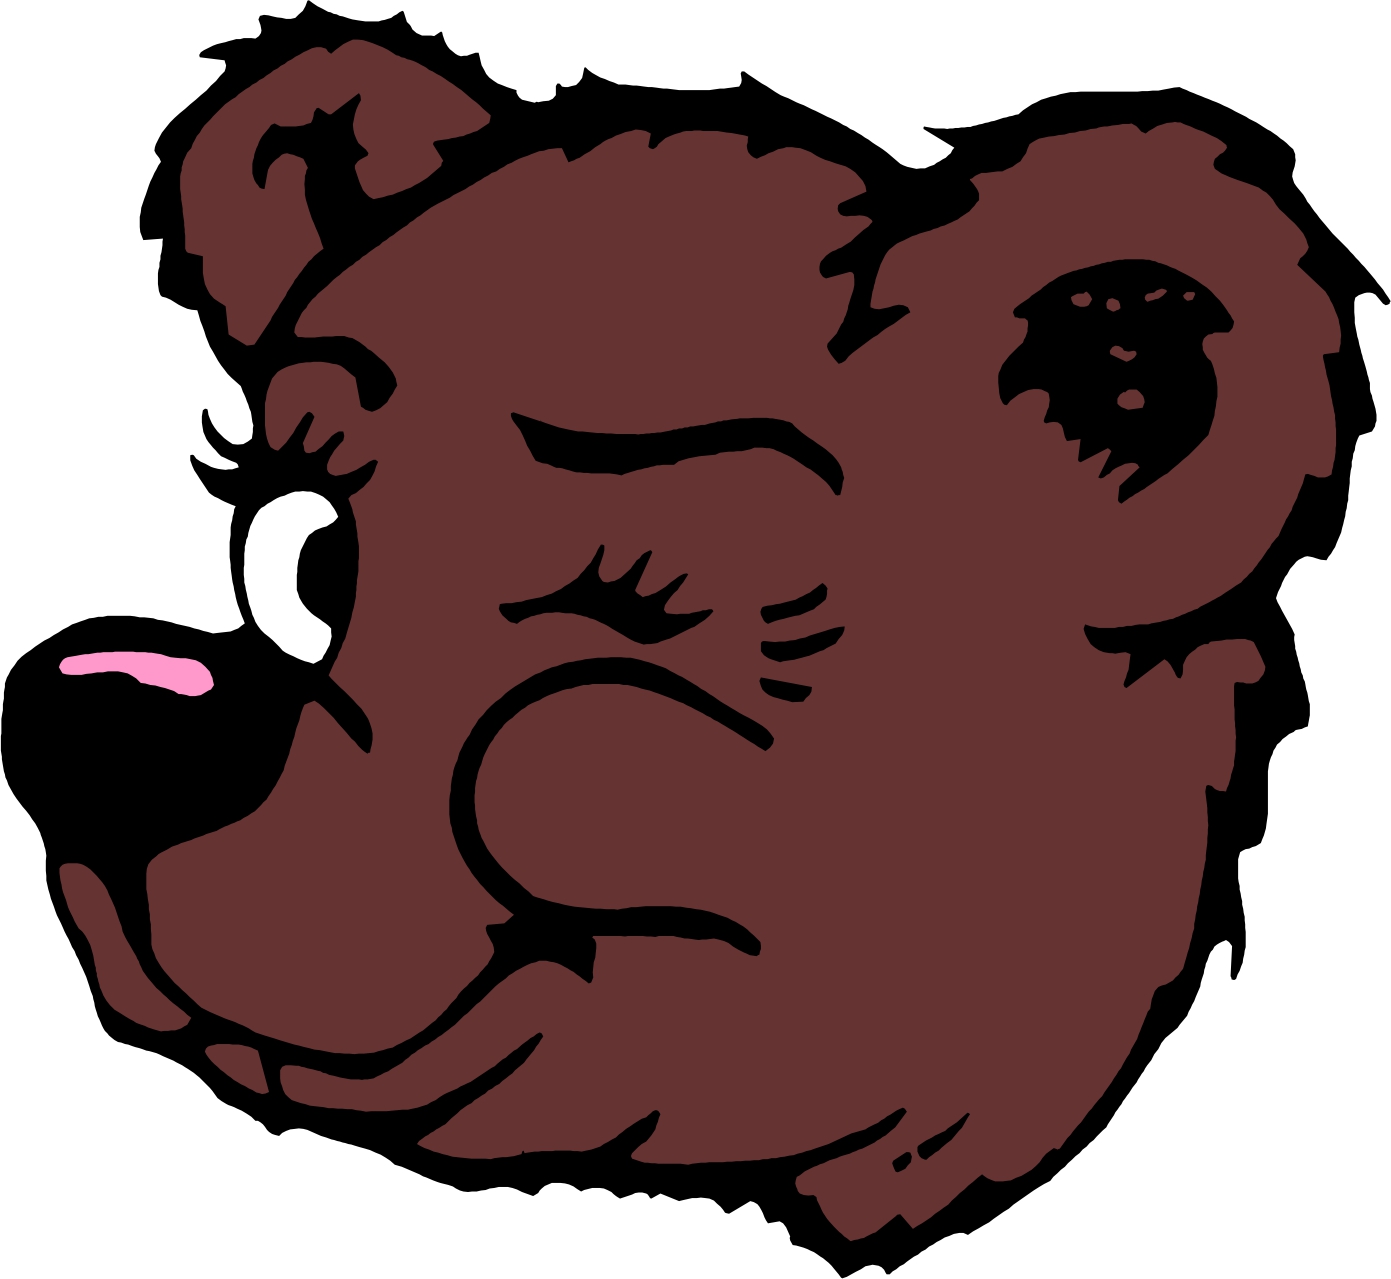 Pictures Of Cartoon Bears - Clipart library